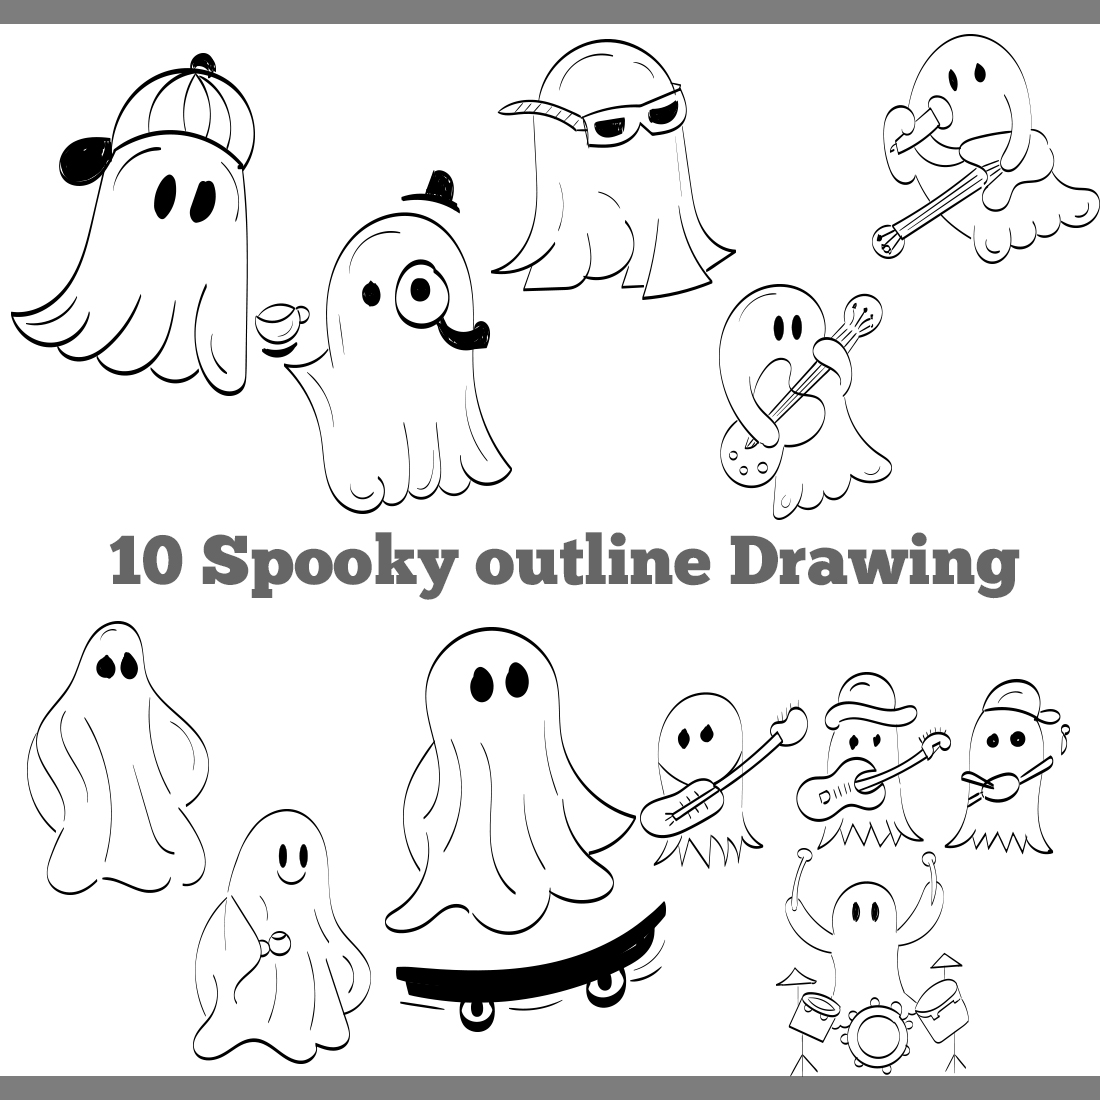 Ghost Spooky Outline Drawing cover image.